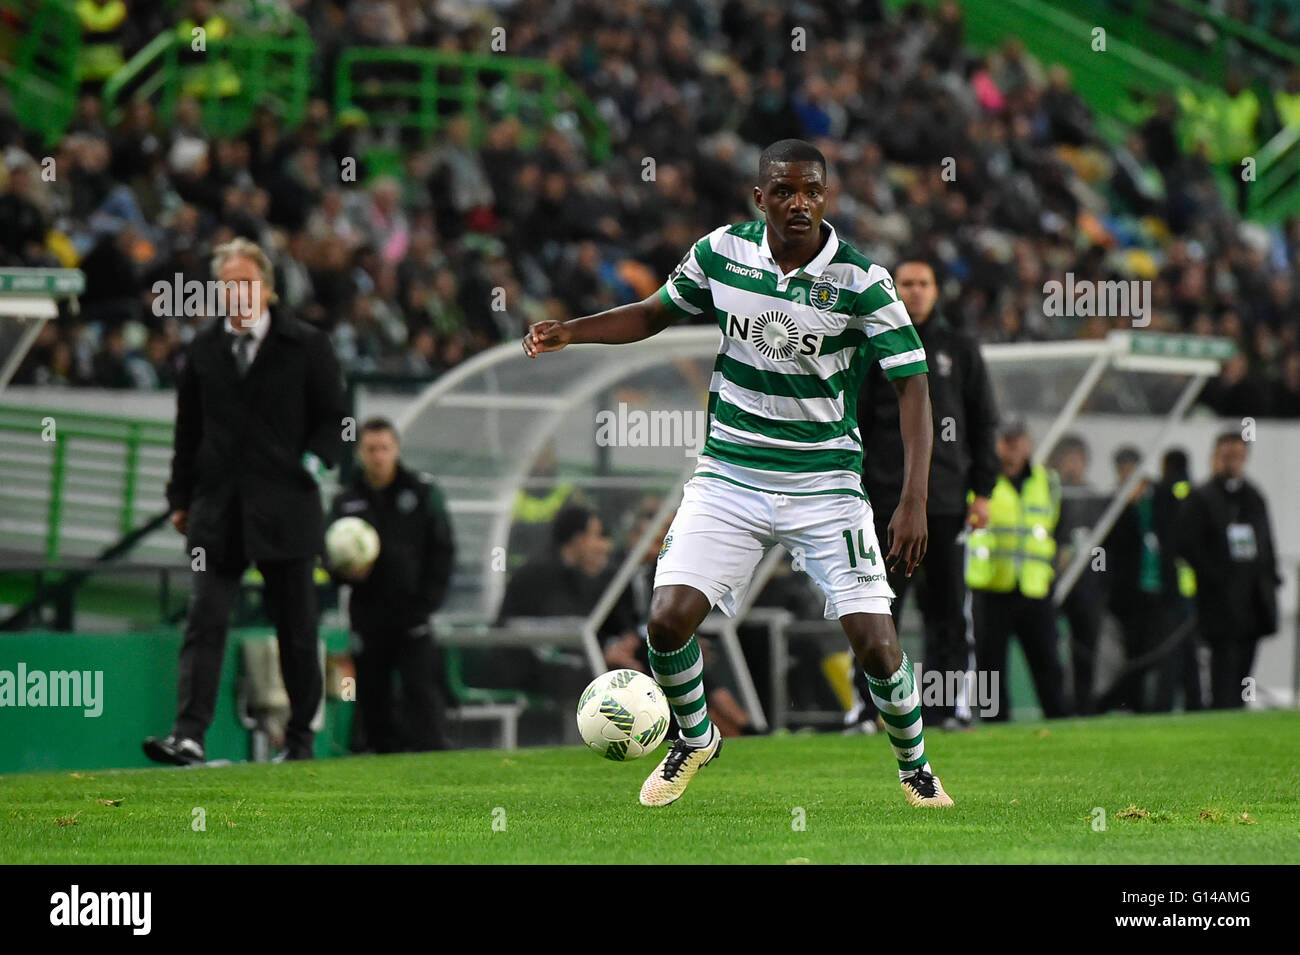 Portugal, Lisbon,May 07,2016 - SPORTING-V.SETÚBAL  - William Carvalho, Sporting player, during Portuguese League Football match between Sporting and V. Setúbal in Lisbon, Portugal. Photo: Bruno de Carvalho/ImagesPic Stock Photo